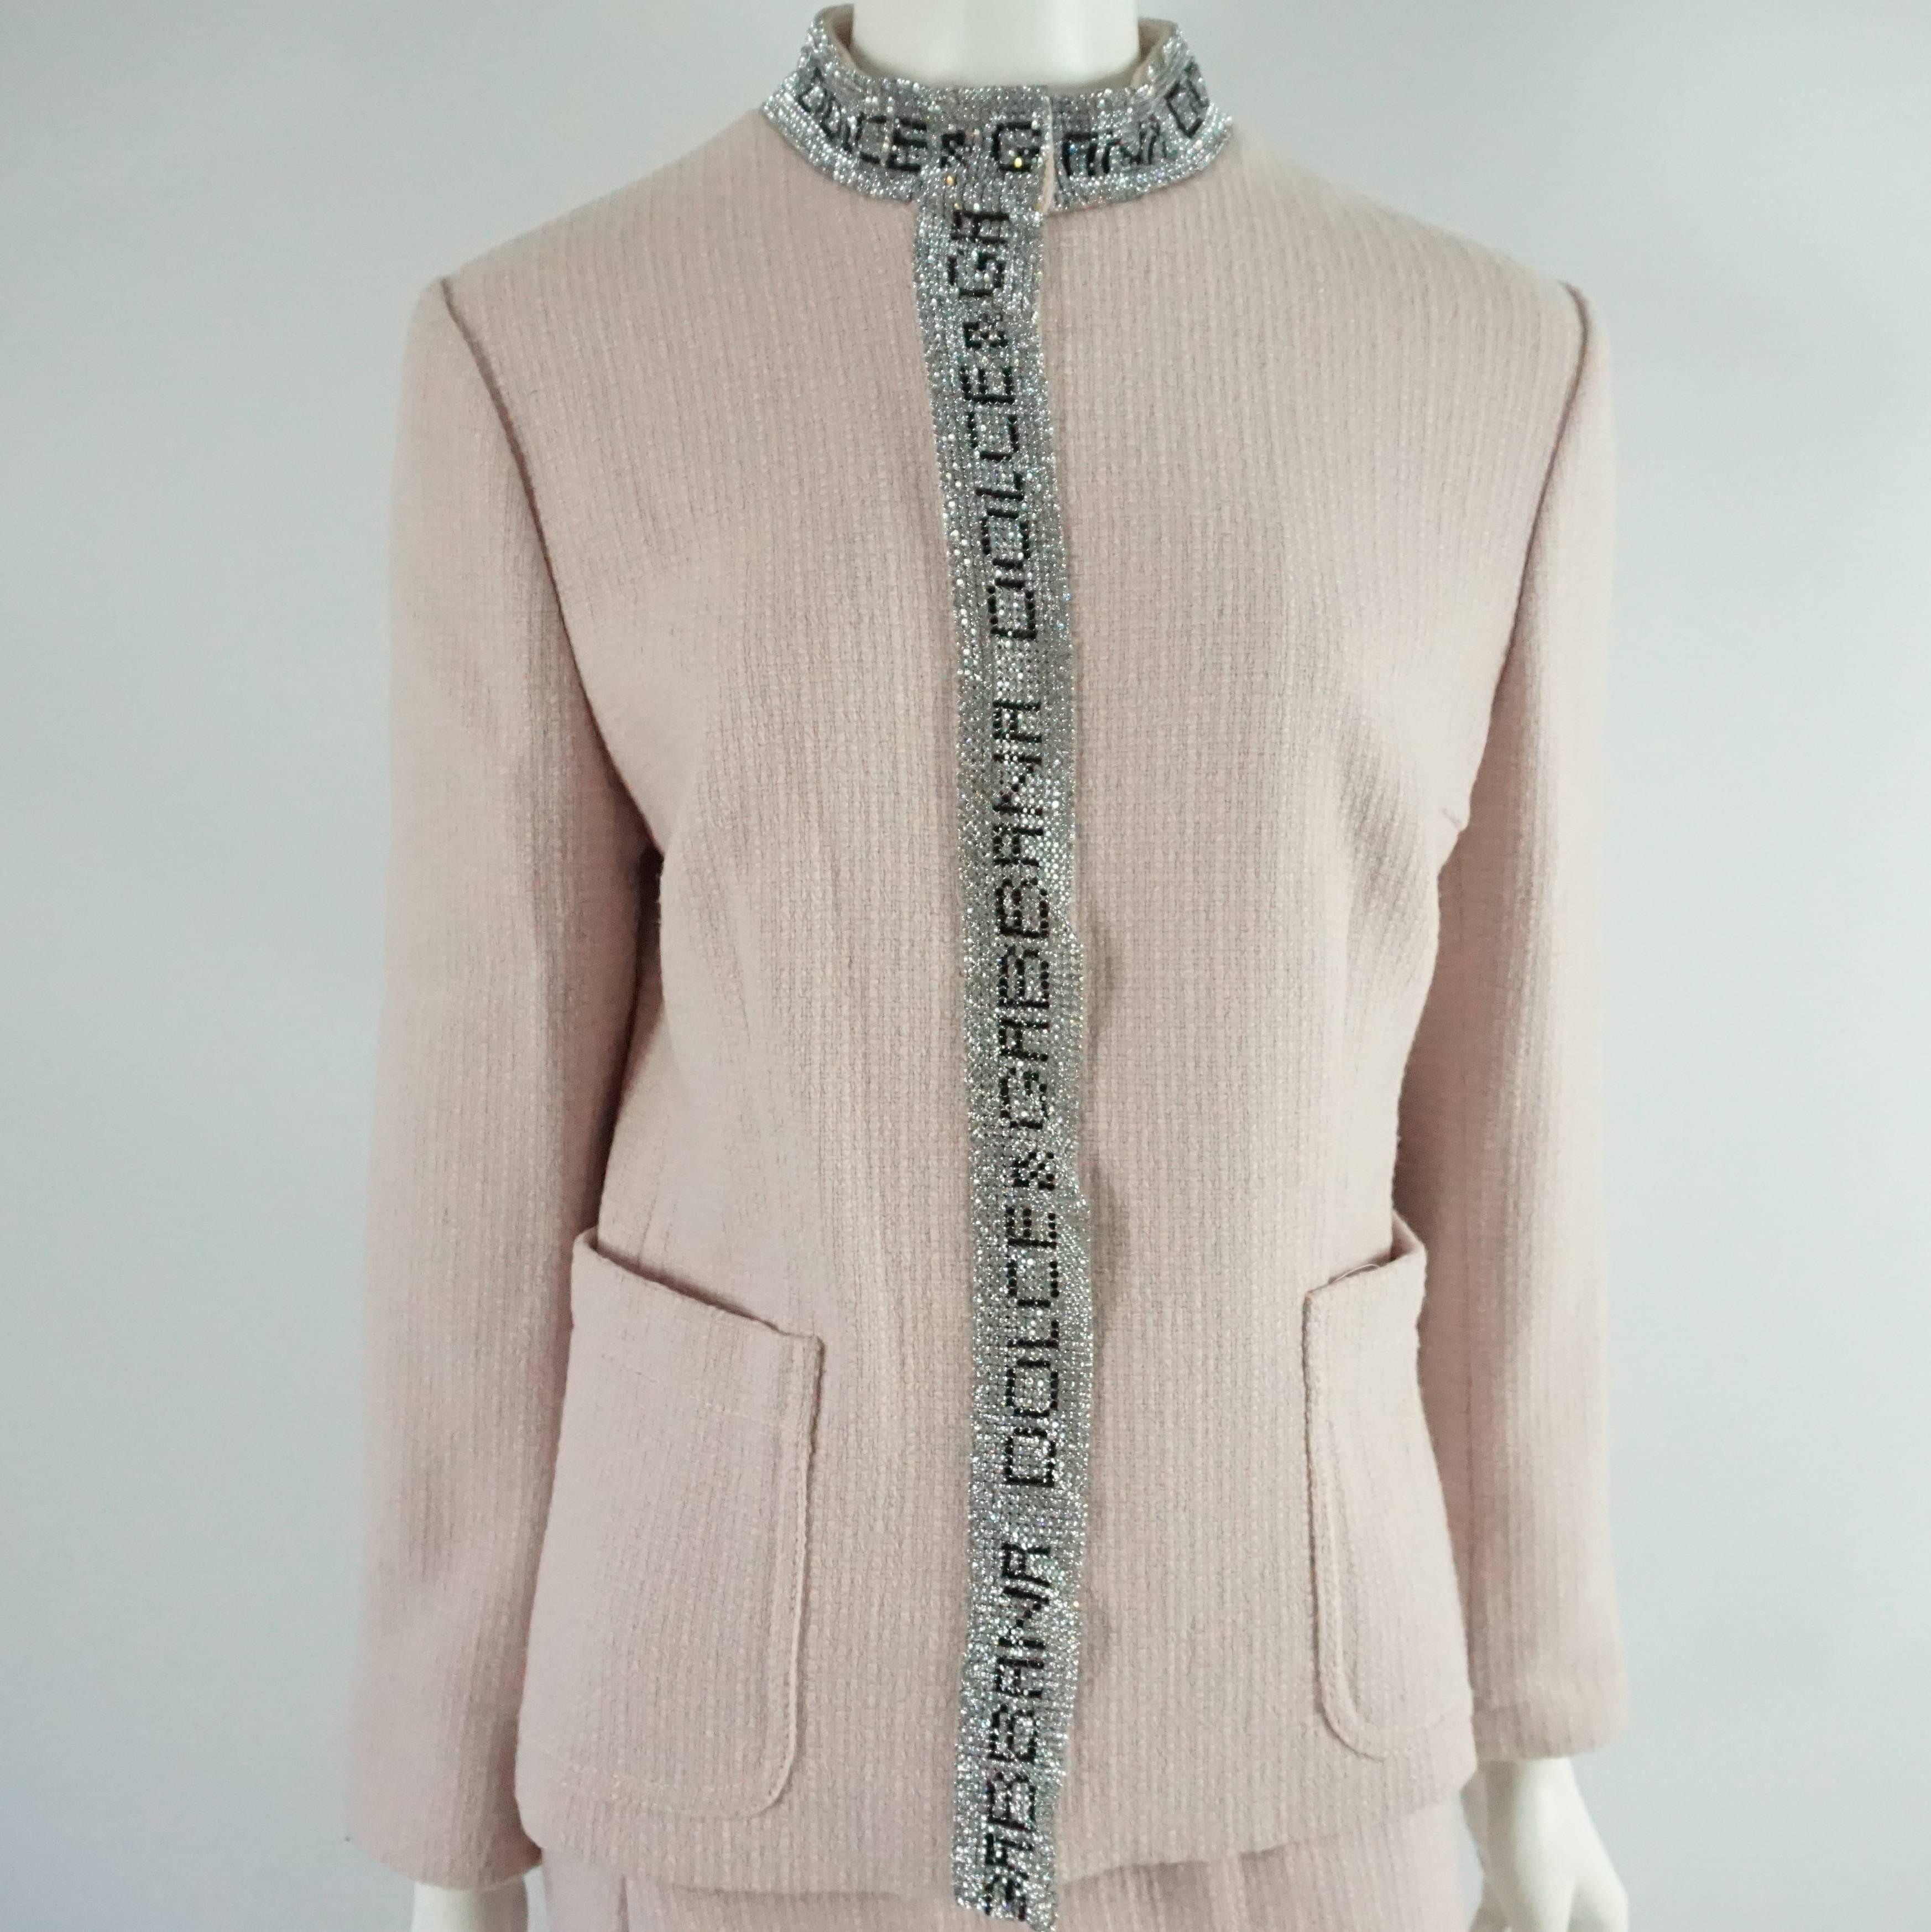 Dolce & Gabbana Pink Tweed Skirt Suit with a Rhinestone Logo Trim - Size 44 For Sale 1